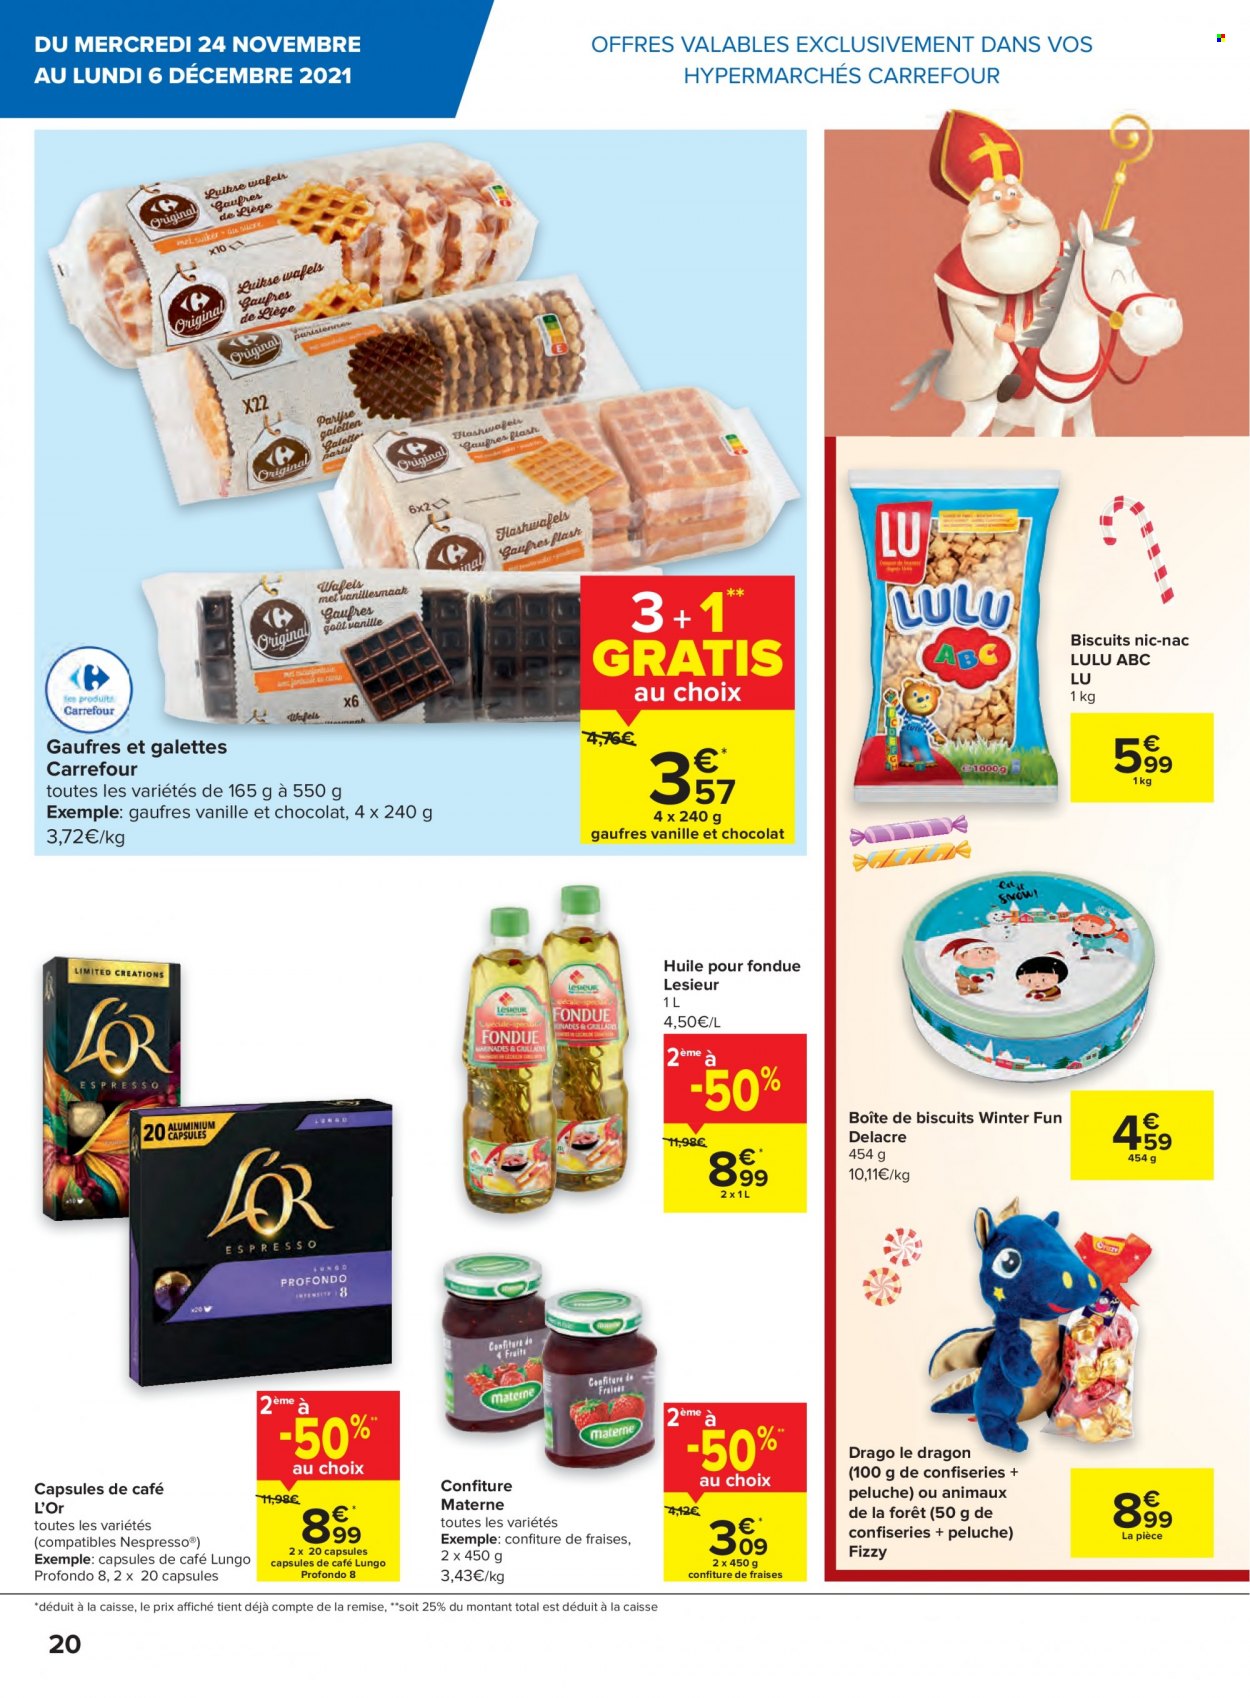 Catalogue Carrefour hypermarkt - 24.11.2021 - 6.12.2021. Page 20.